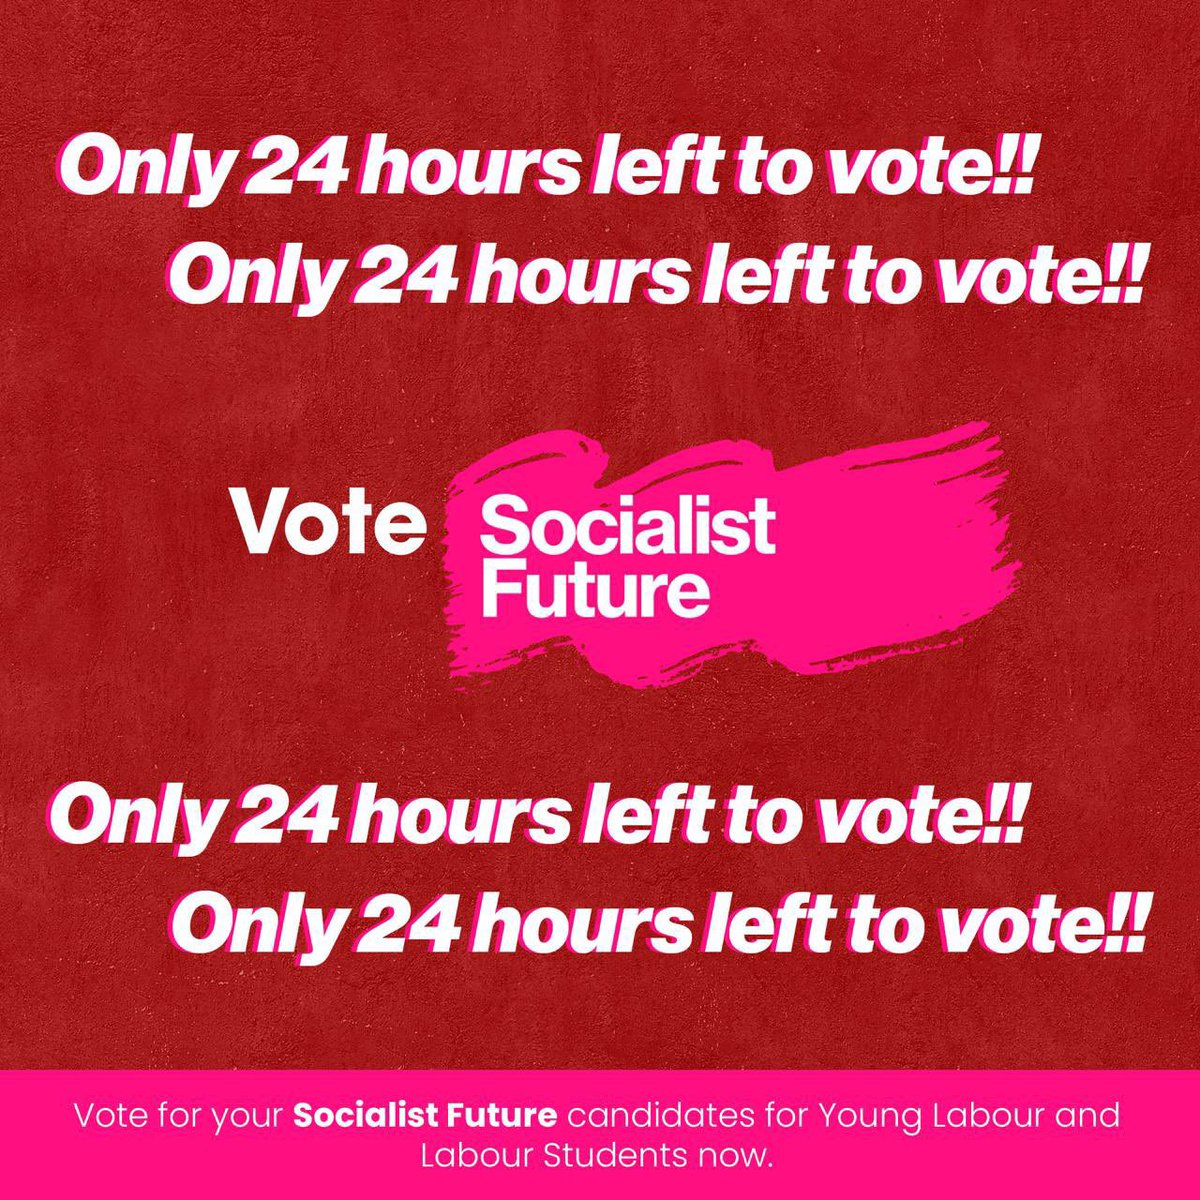 Make sure to cast your vote in the Young Labour and Labour Students elections! Much like the popular social media platform, the clock is tiktoking…